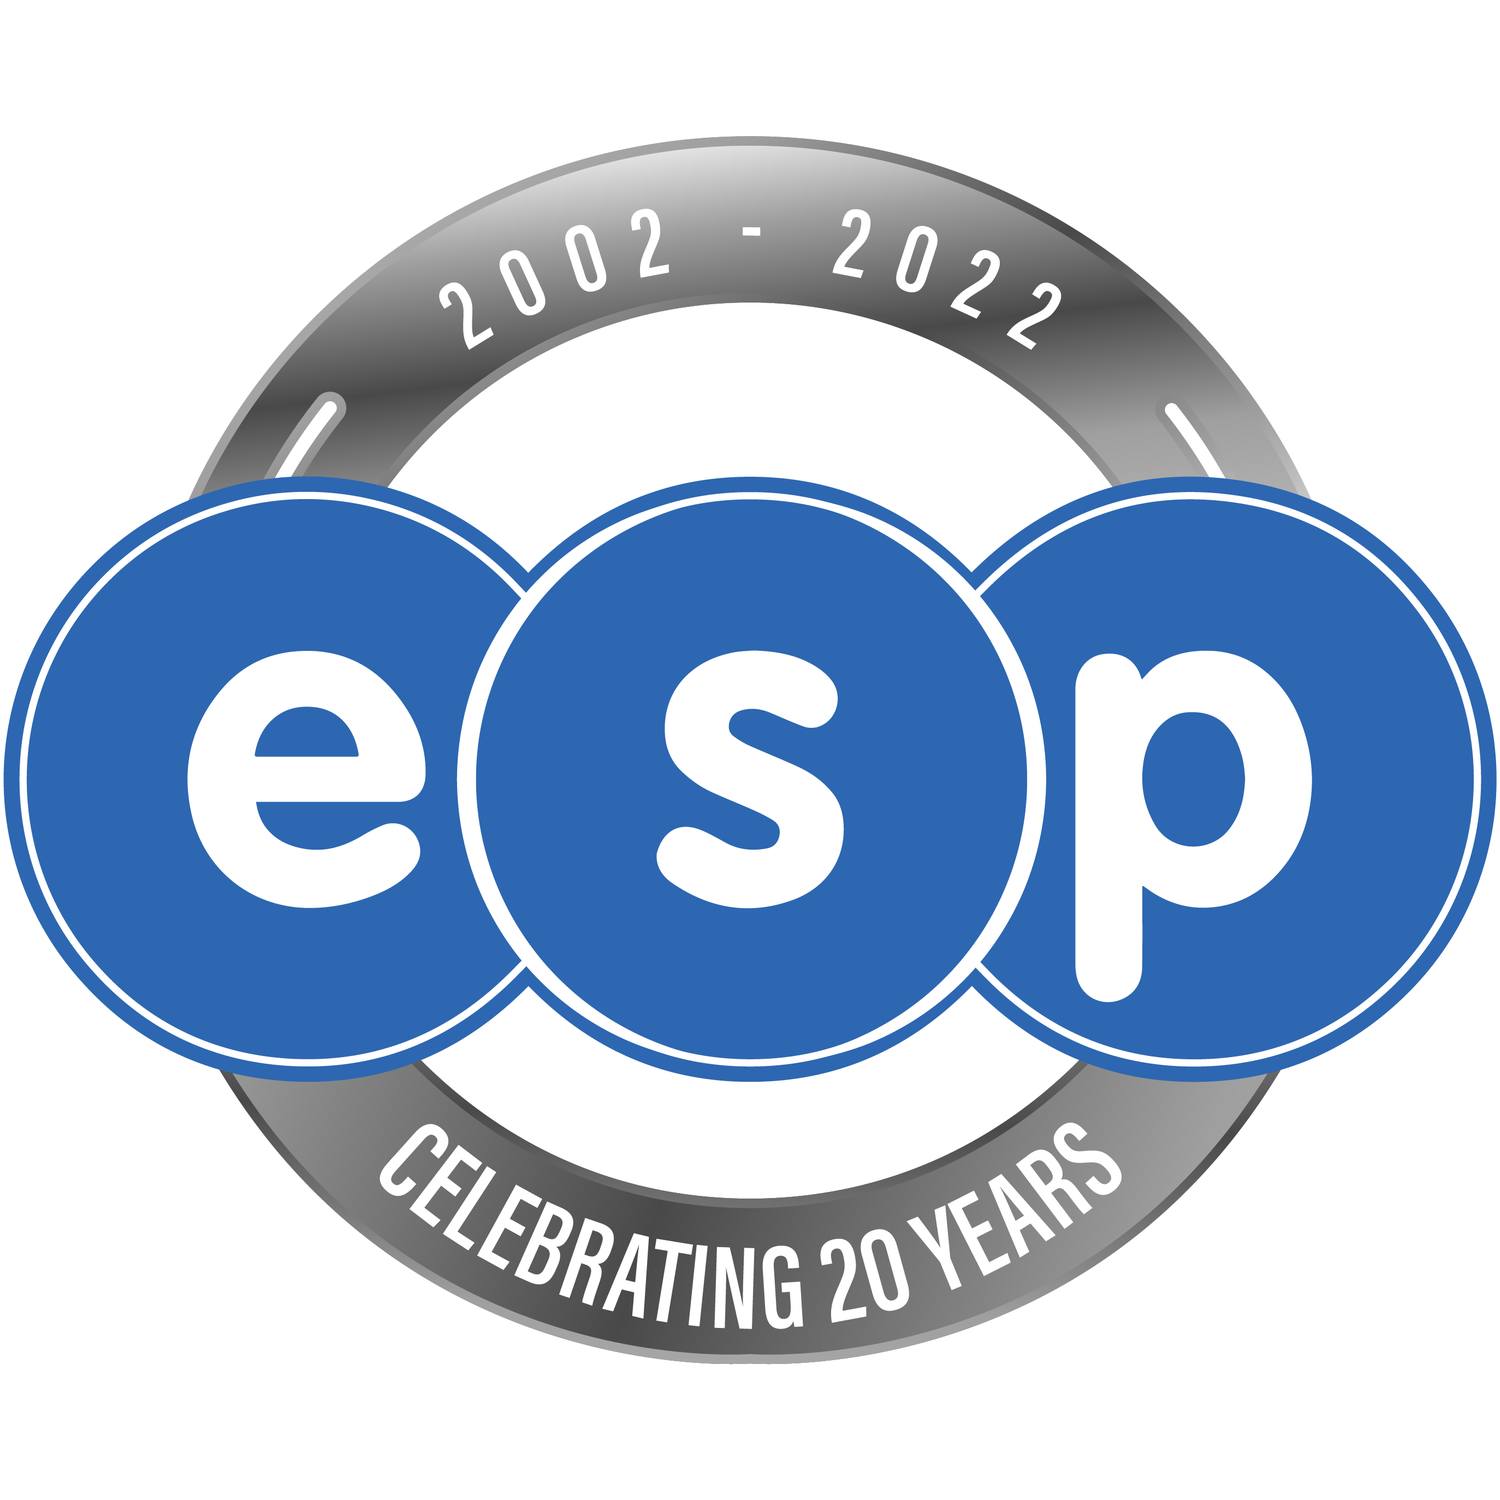 ESP Projects